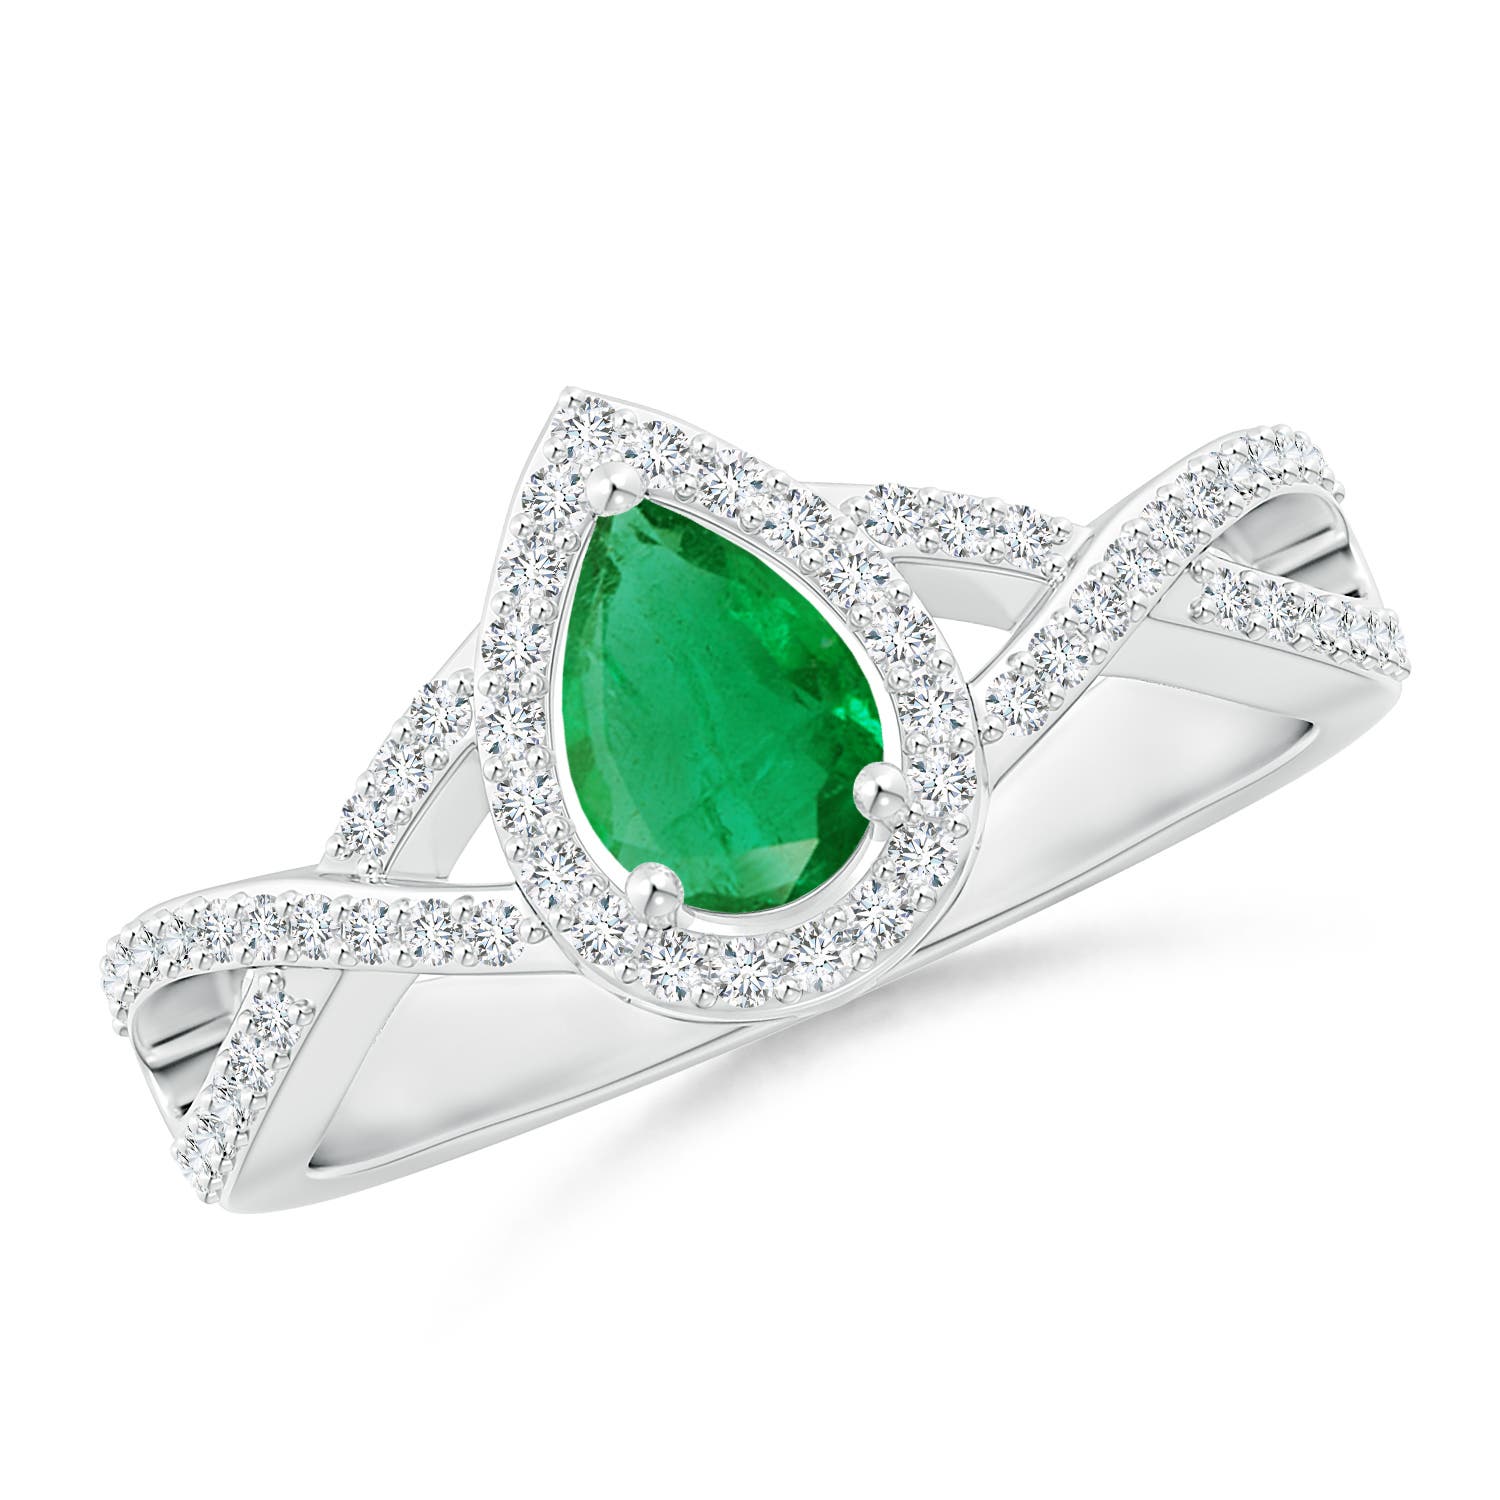 AA - Emerald / 0.65 CT / 14 KT White Gold